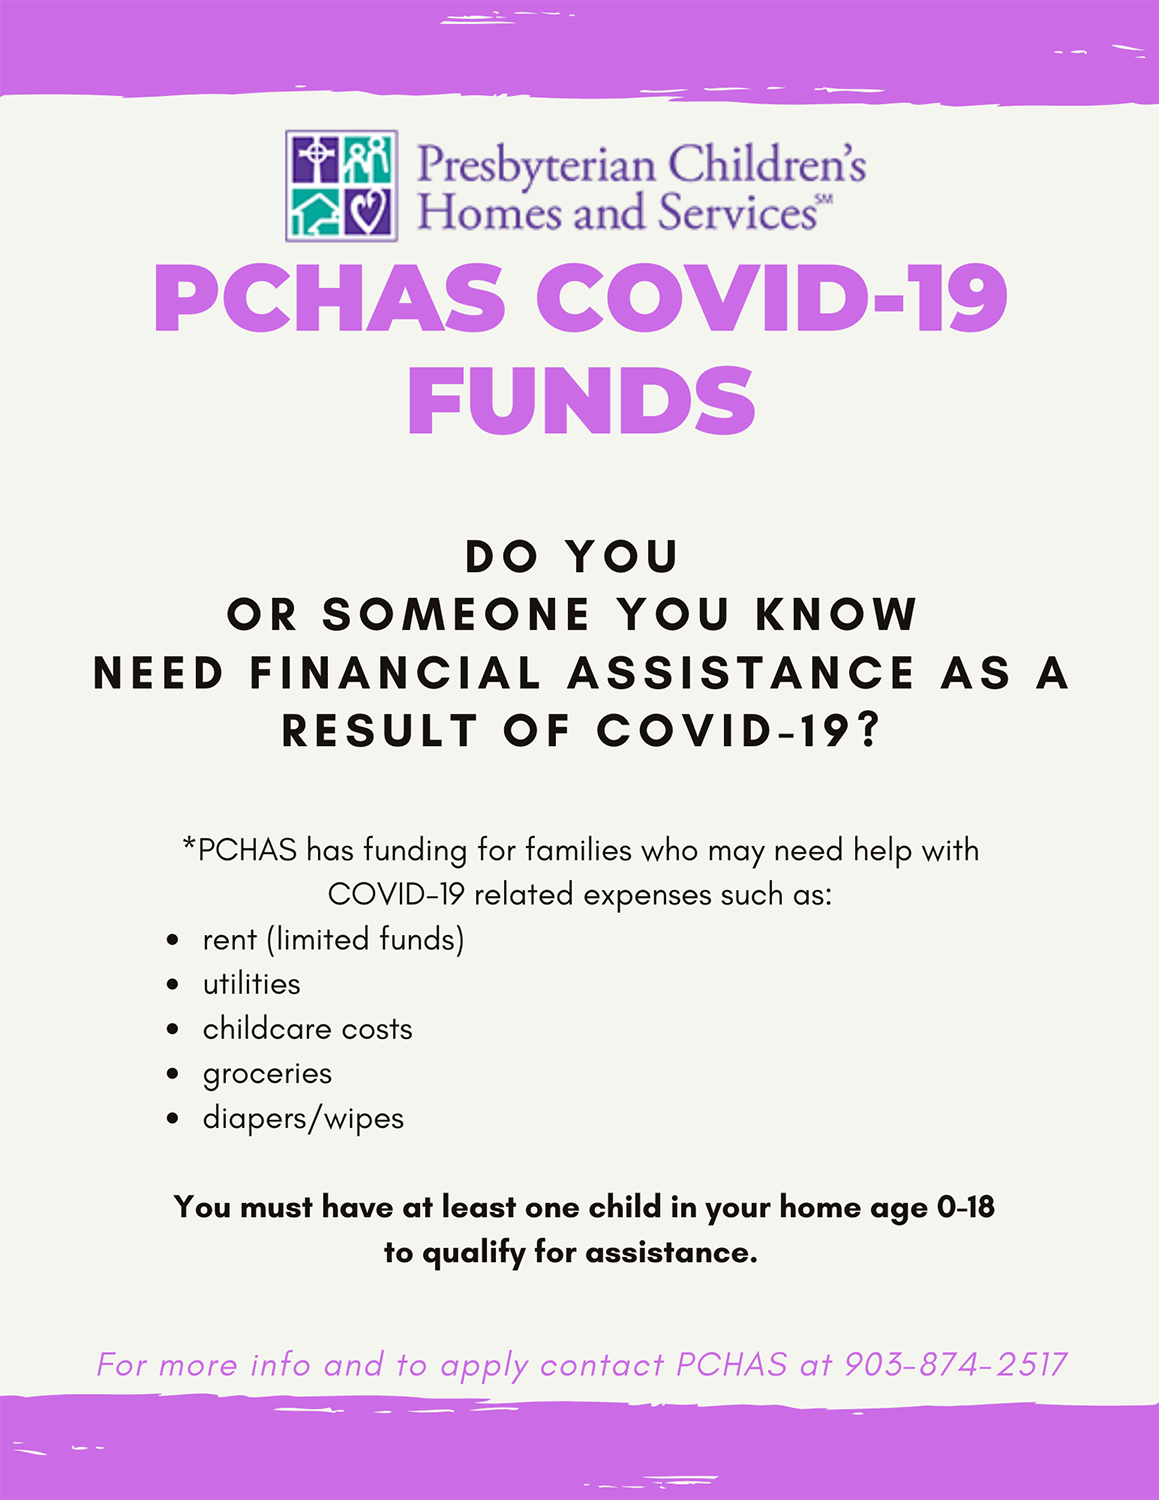 COVID Funds